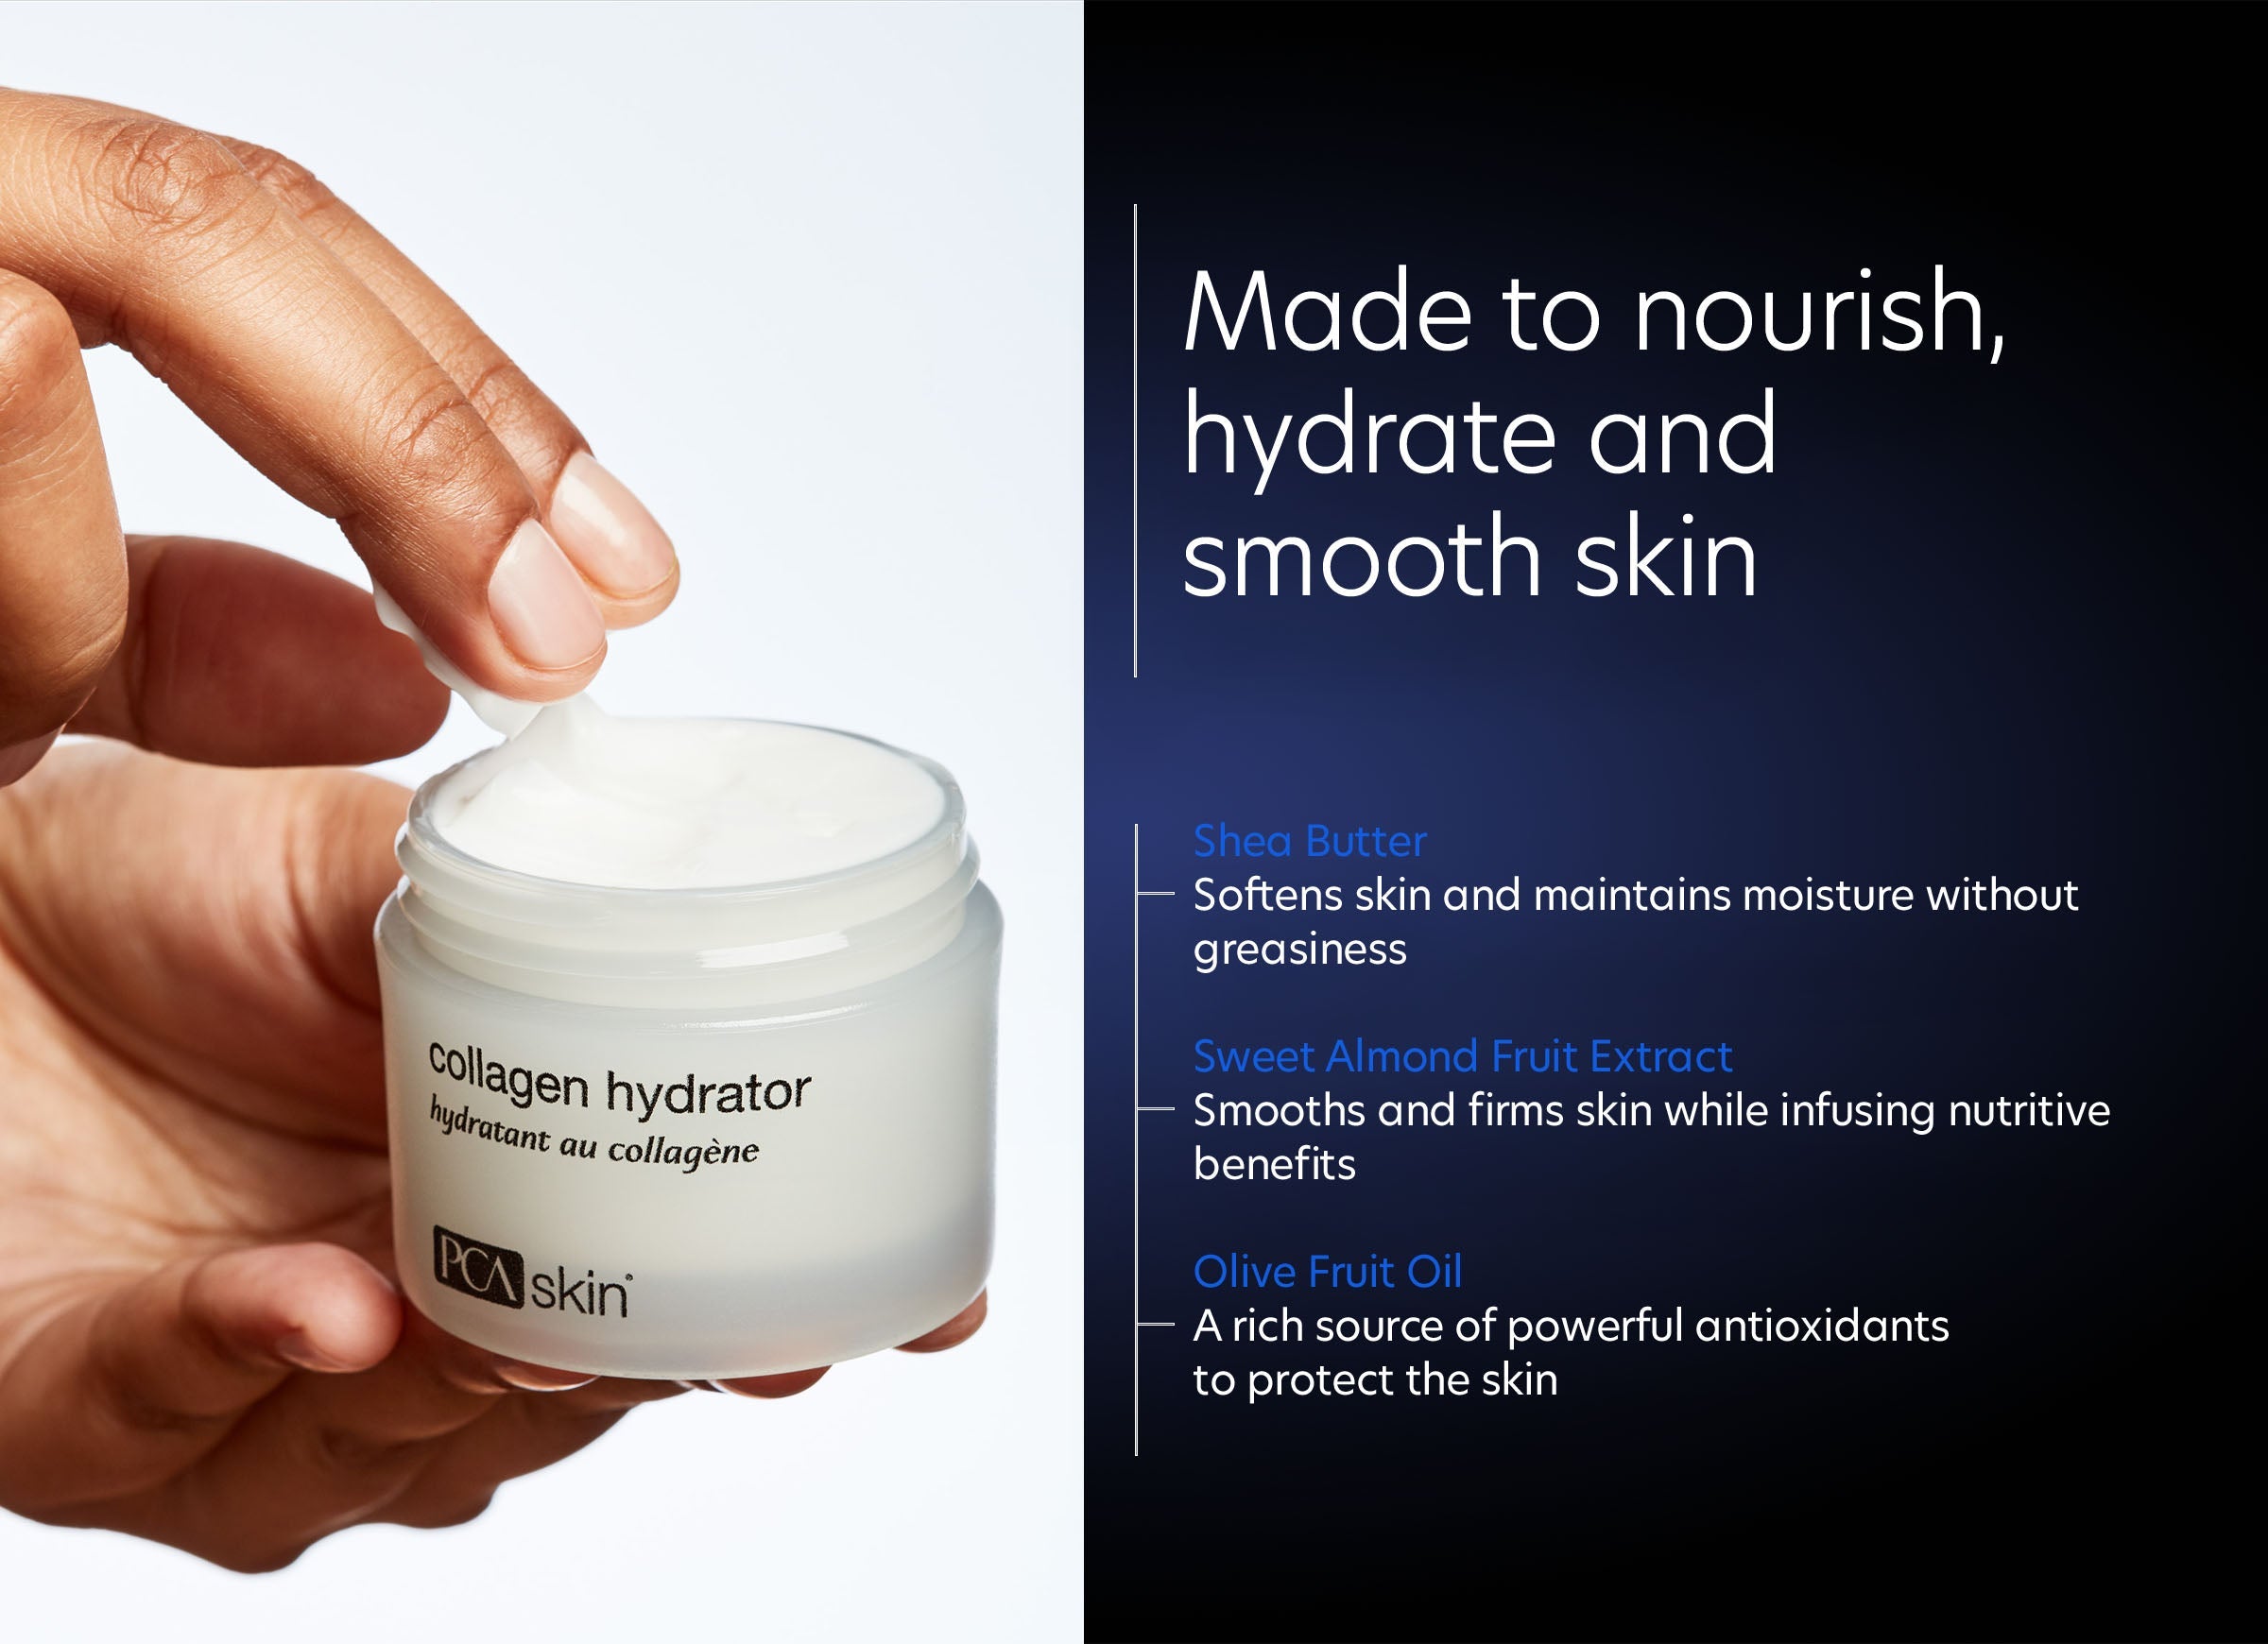 Collage Hydrator - Made to nourish hydrate and smooth skin